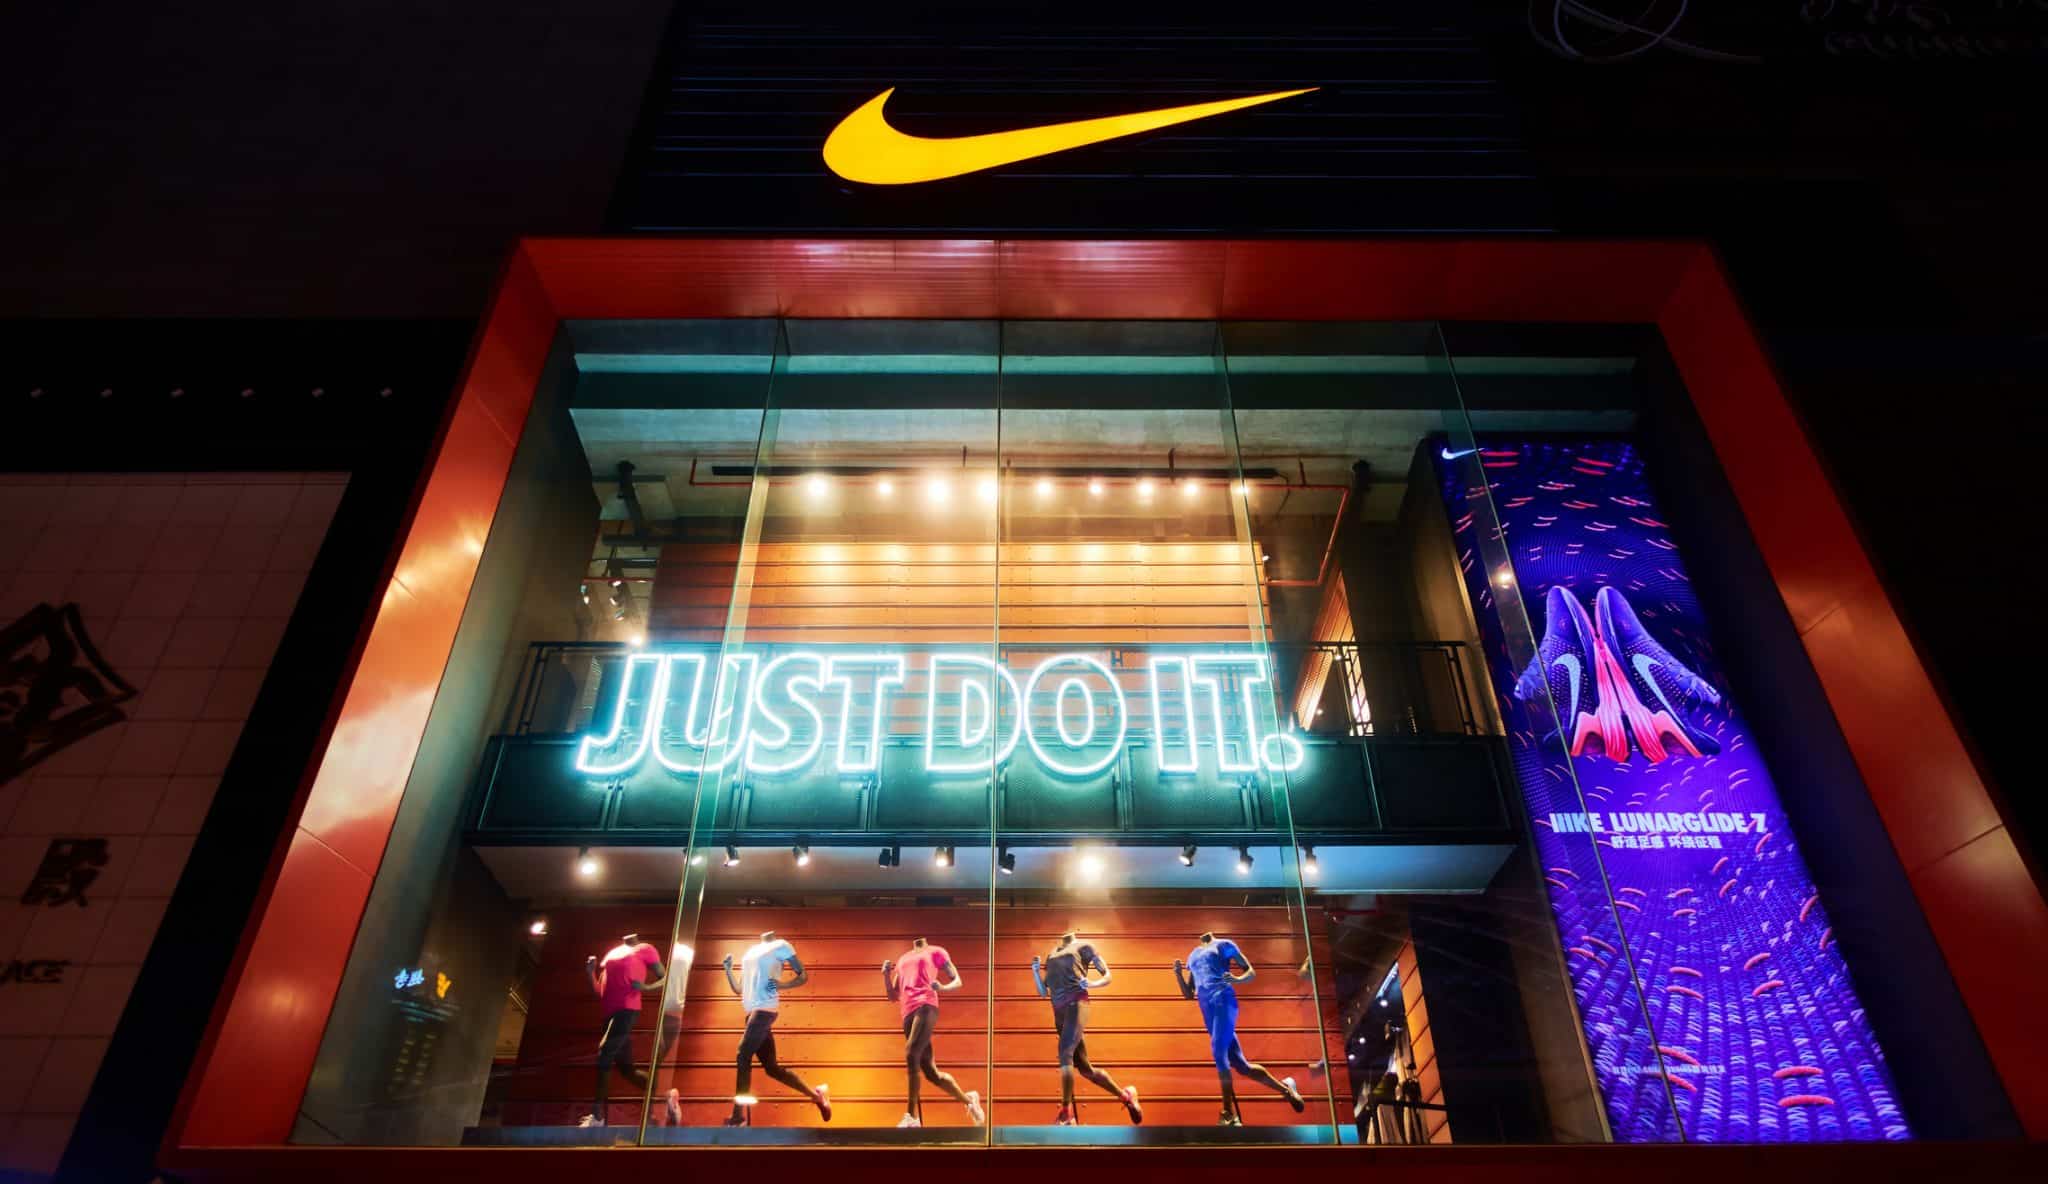 Nike announces layoffs of 740 employees at its global headquarters in Oregon